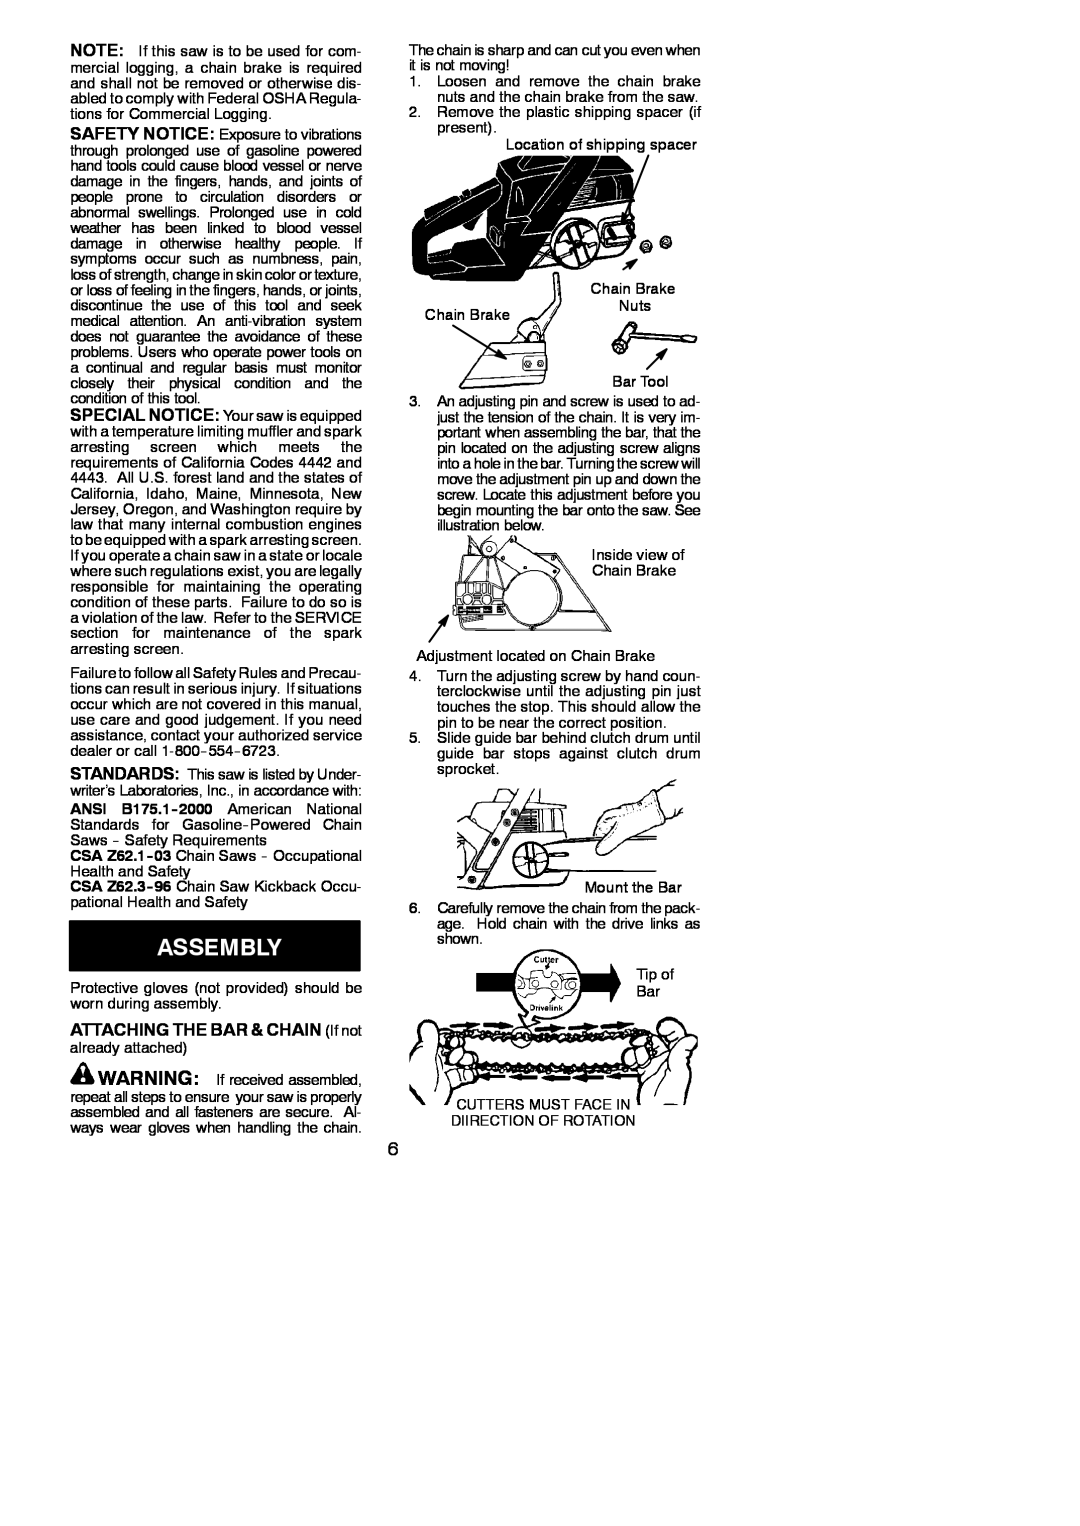 Poulan 530164603 instruction manual Assembly, ATTACHING THE BAR & CHAIN If not 